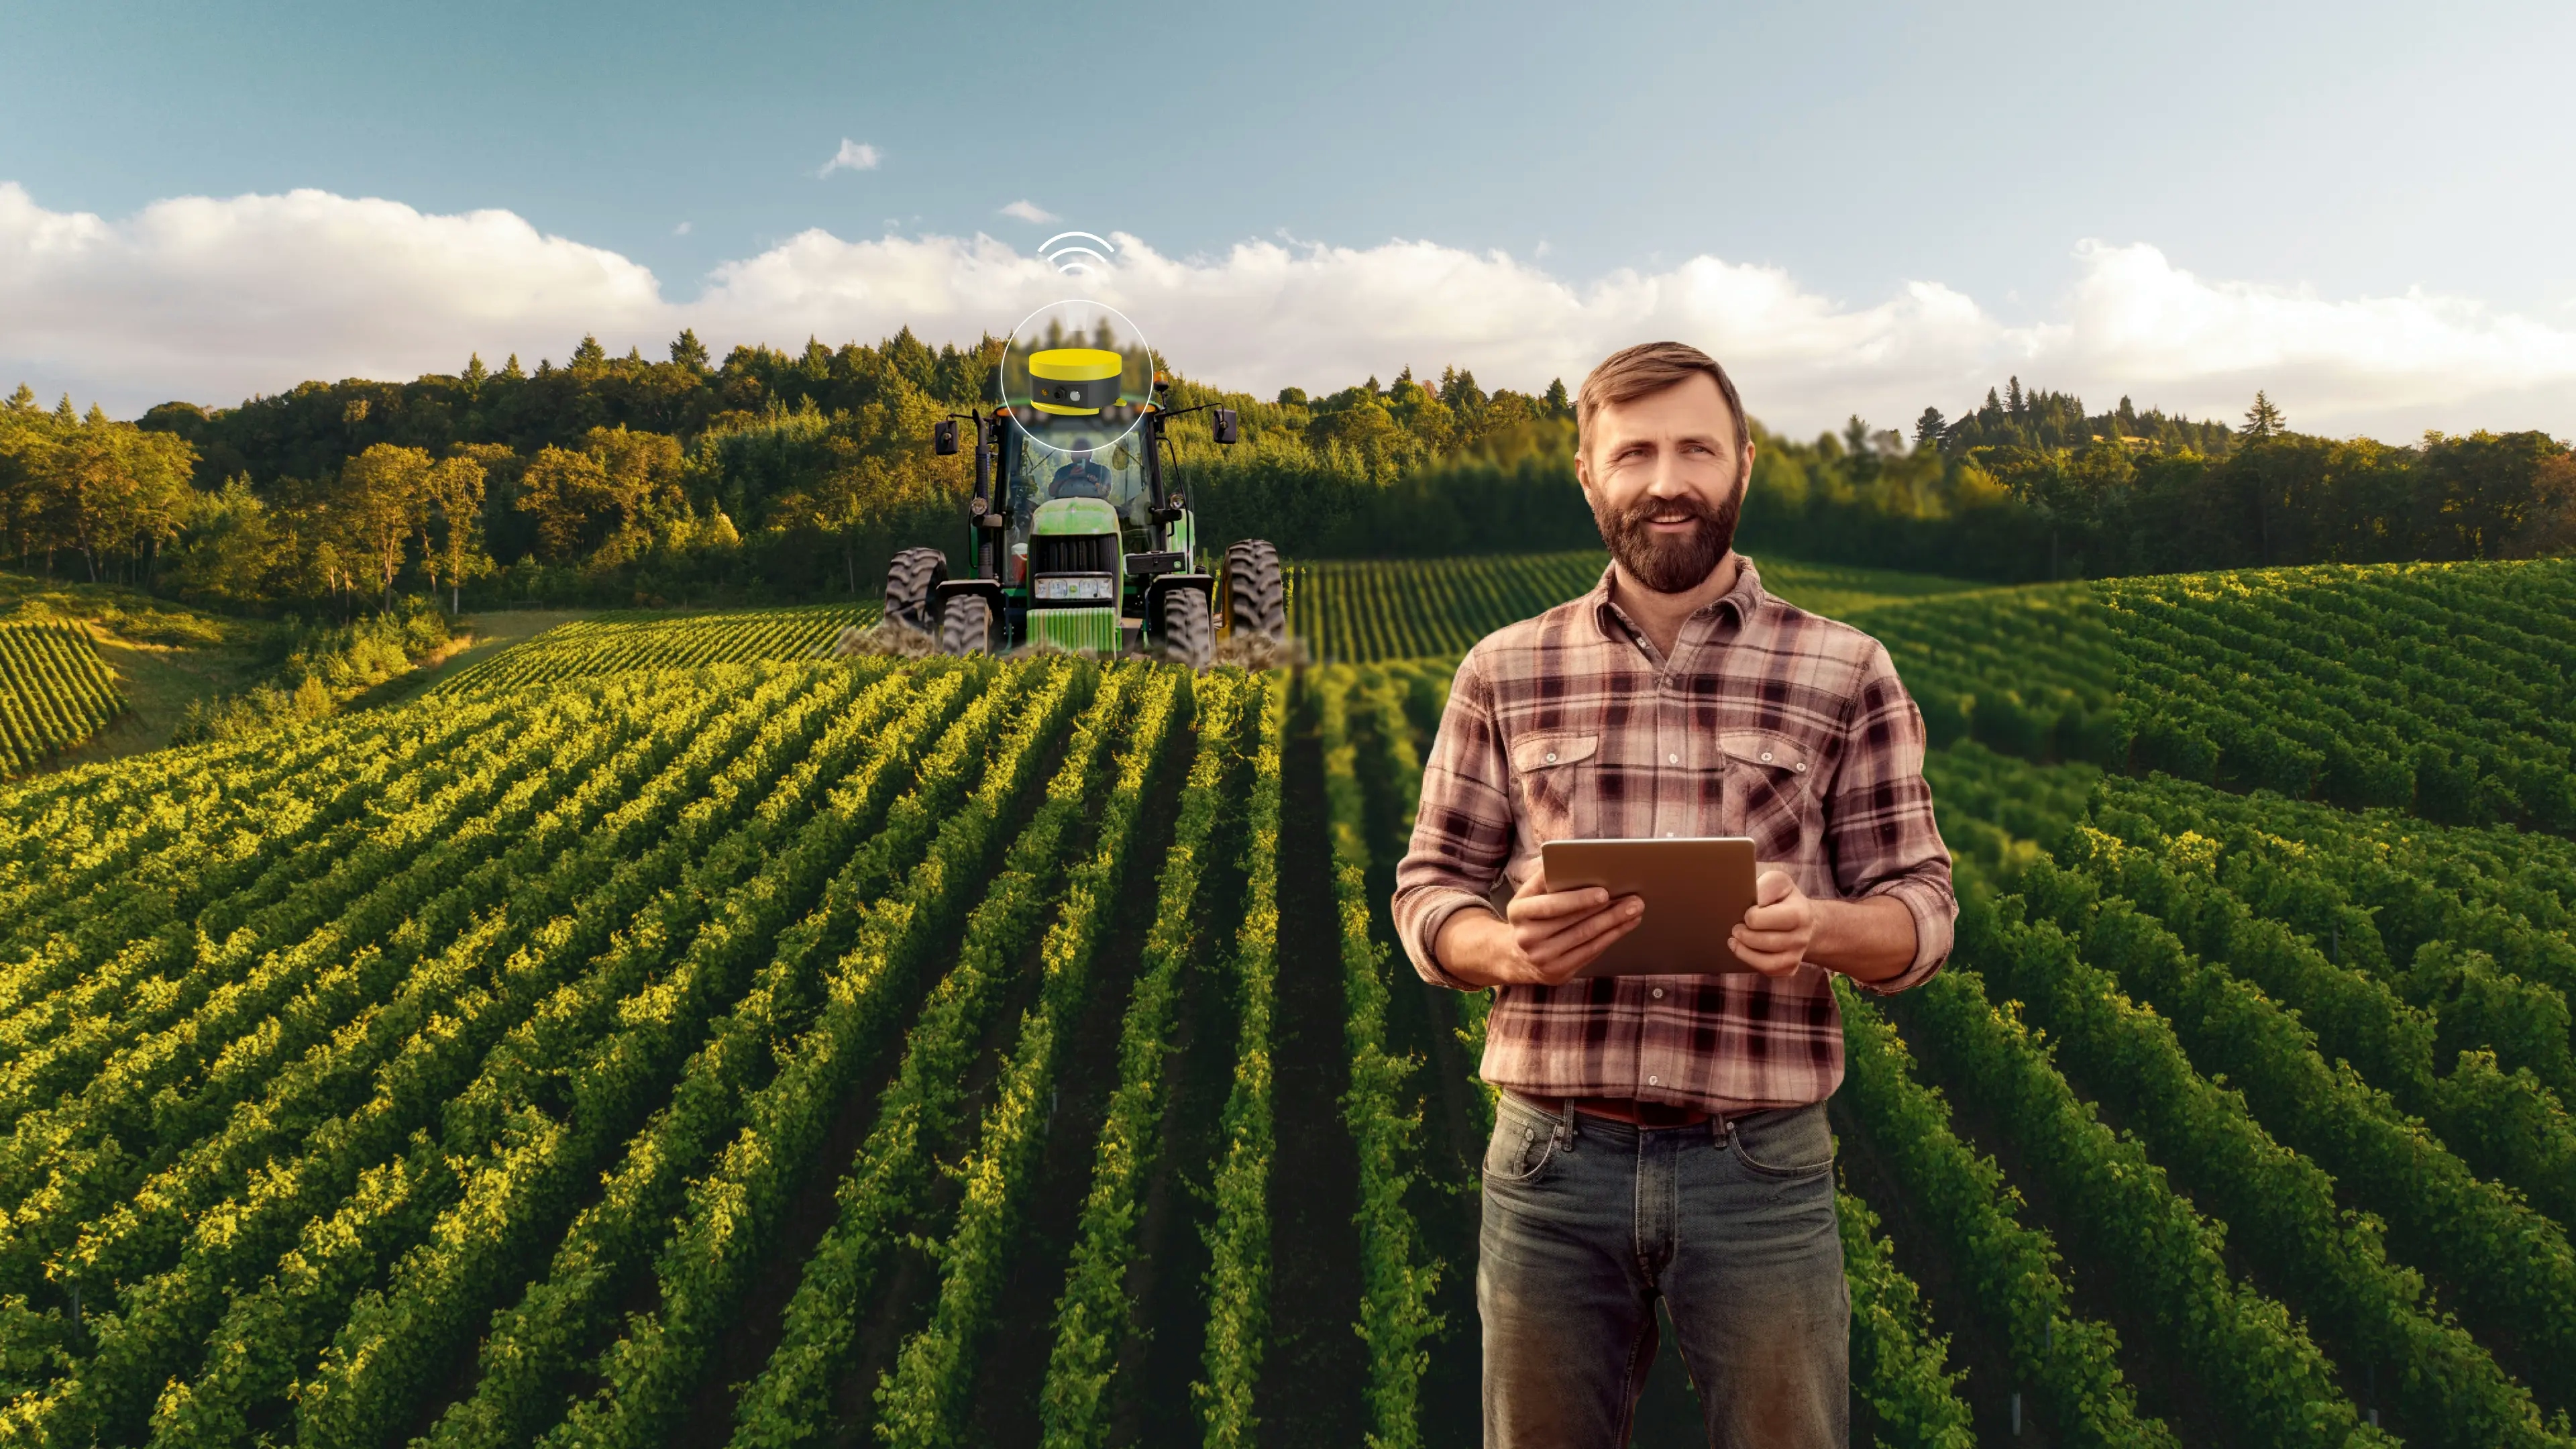 A simple, affordable precision farming starts with FieldBee's Manual Guidance